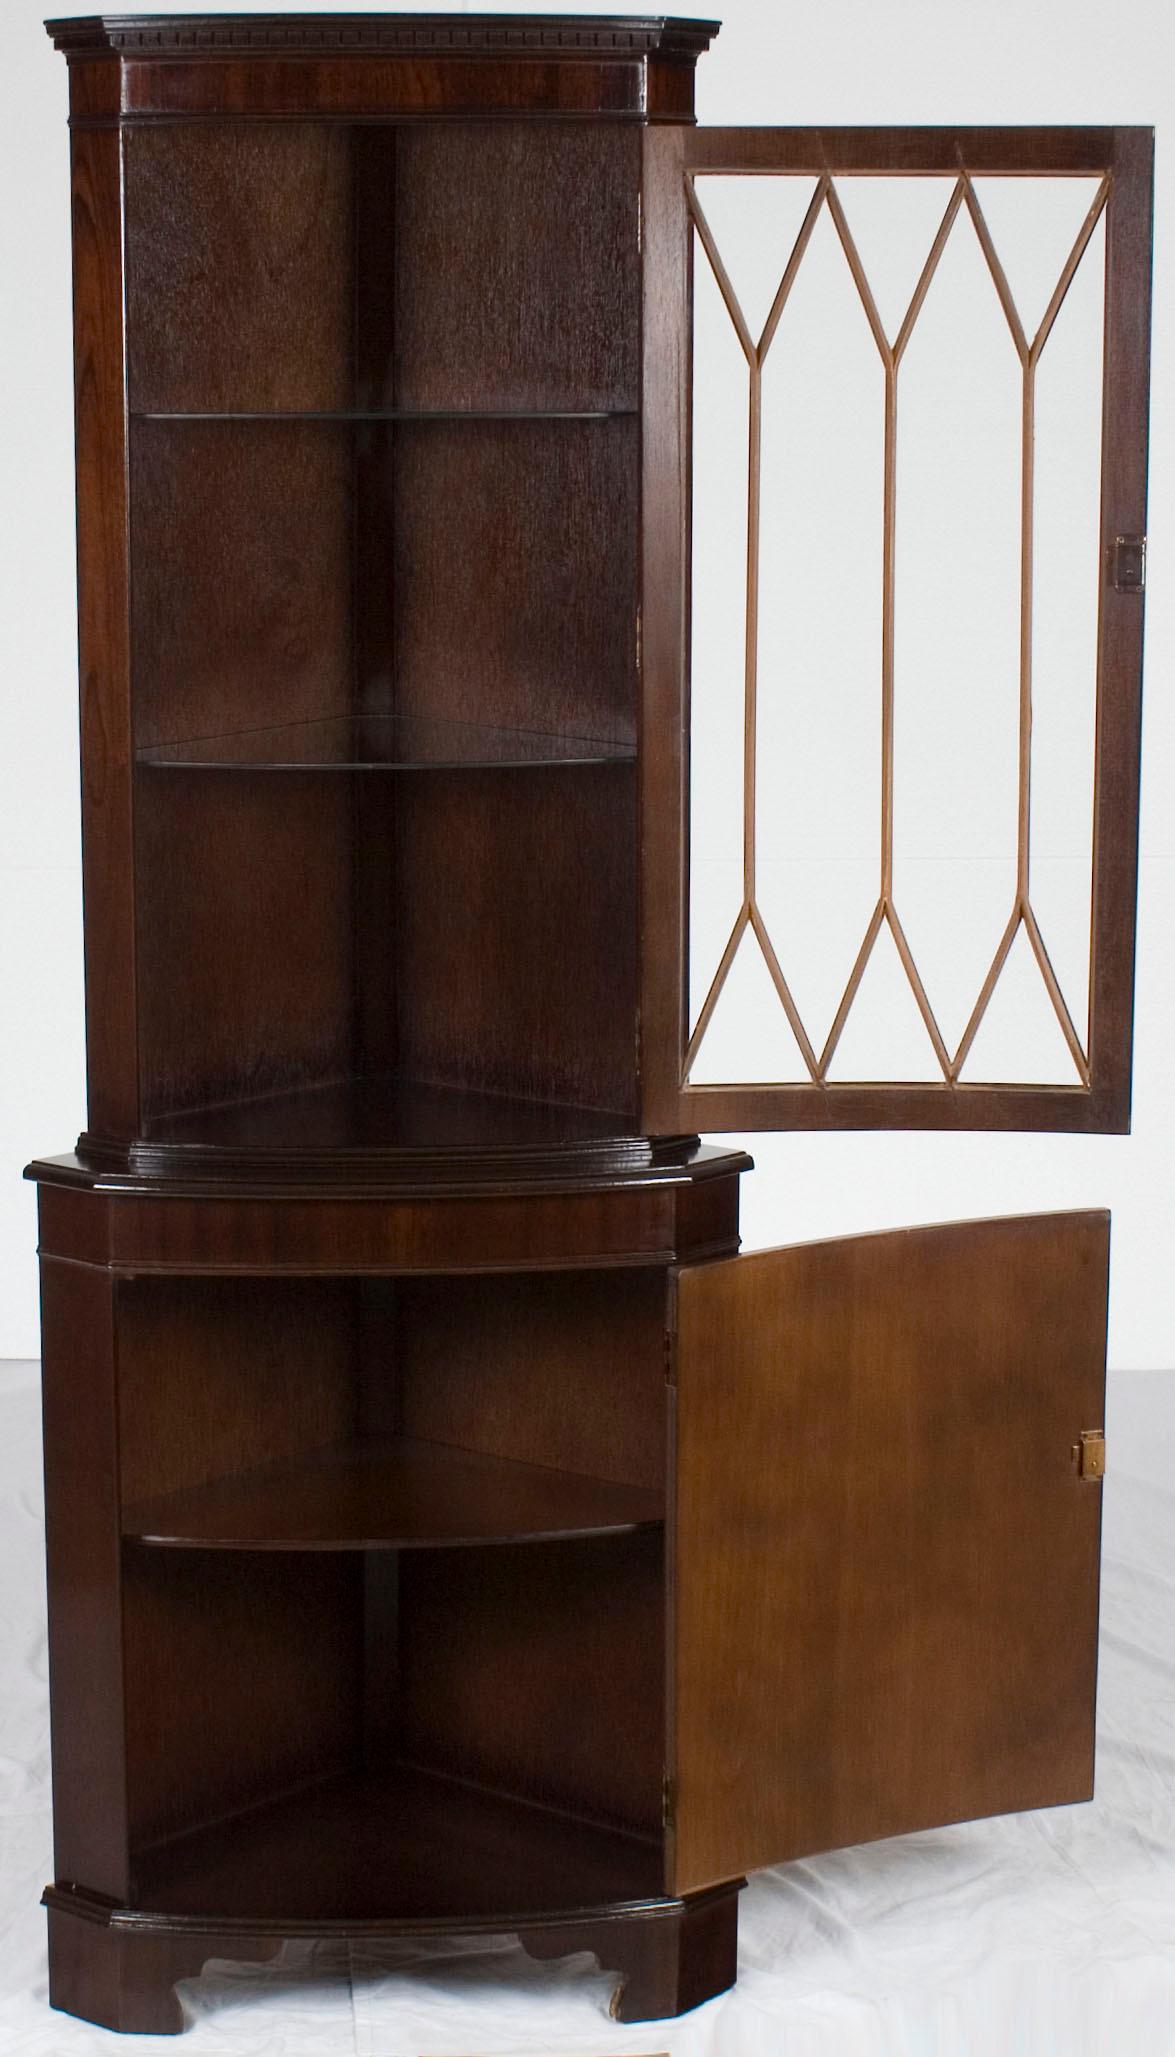 Crafted around the year 1960, this antique mahogany corner cabinet is an exemplary piece of quality English craftsmanship. Featuring flame mahogany wood, individually paned glass, and locking doors, it remains in good condition.

Cabinets like